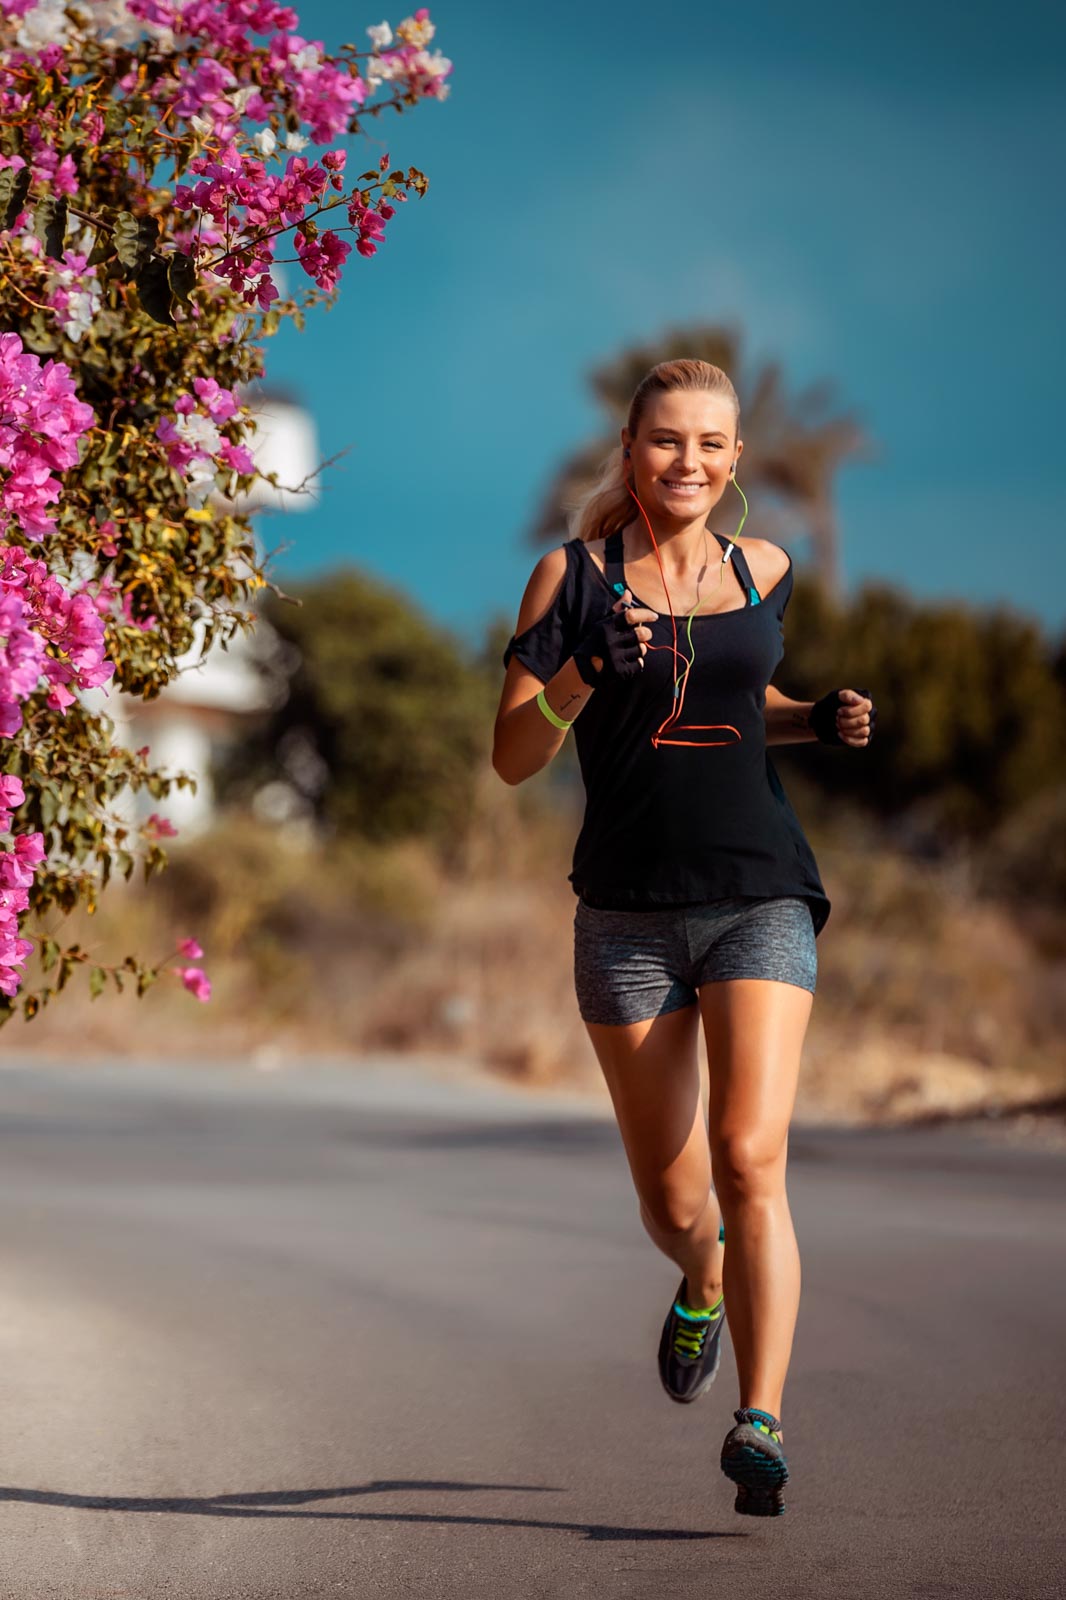 Pain-free running starts at California Sports and Spine Center in Hawthorne.